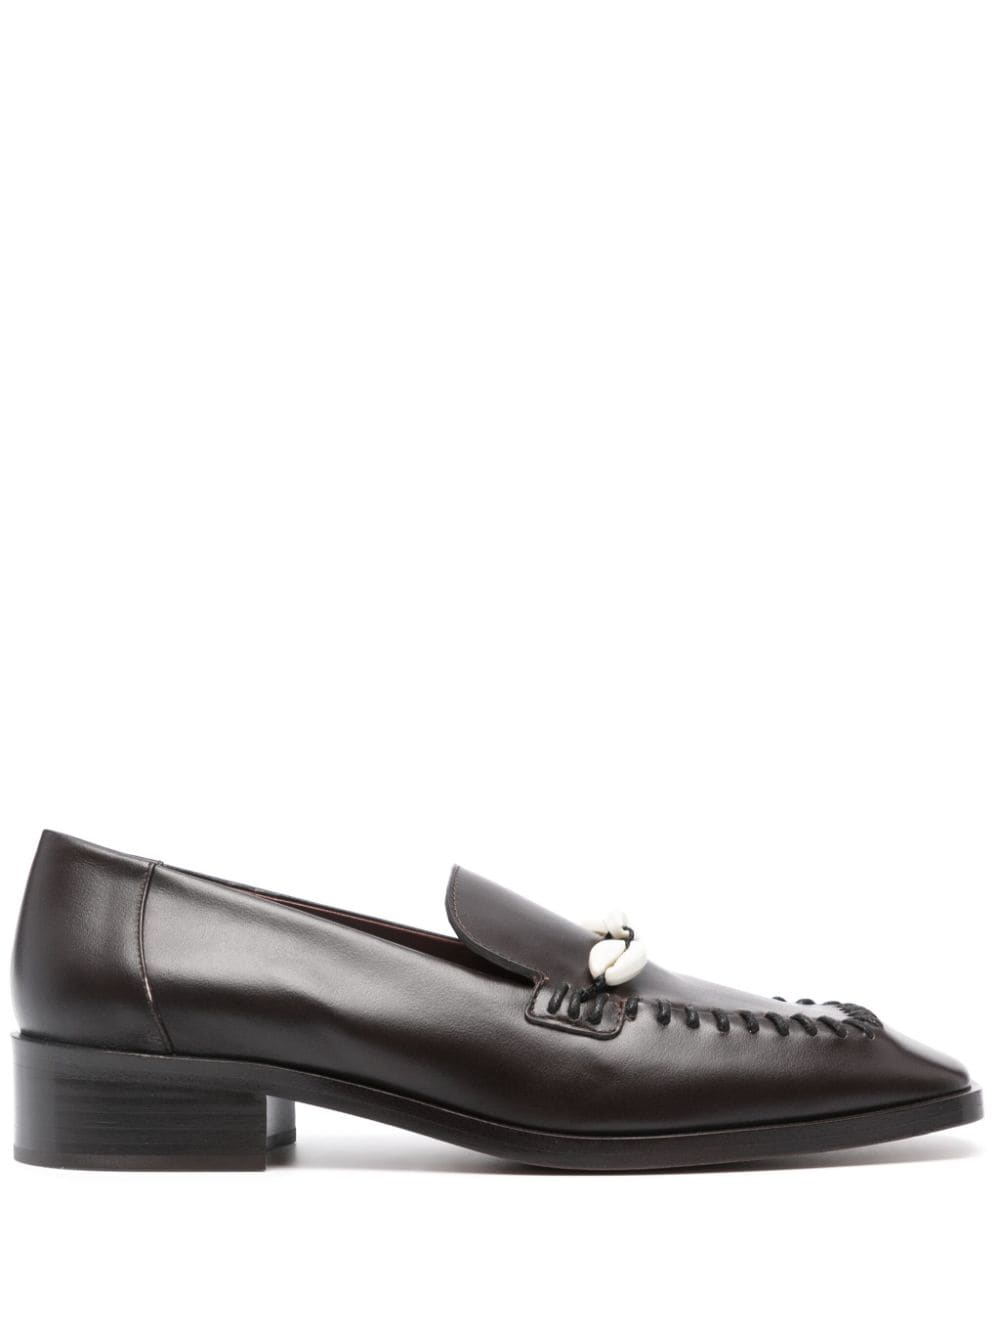 Wales Bonner shell-detail leather loafers - Marrone